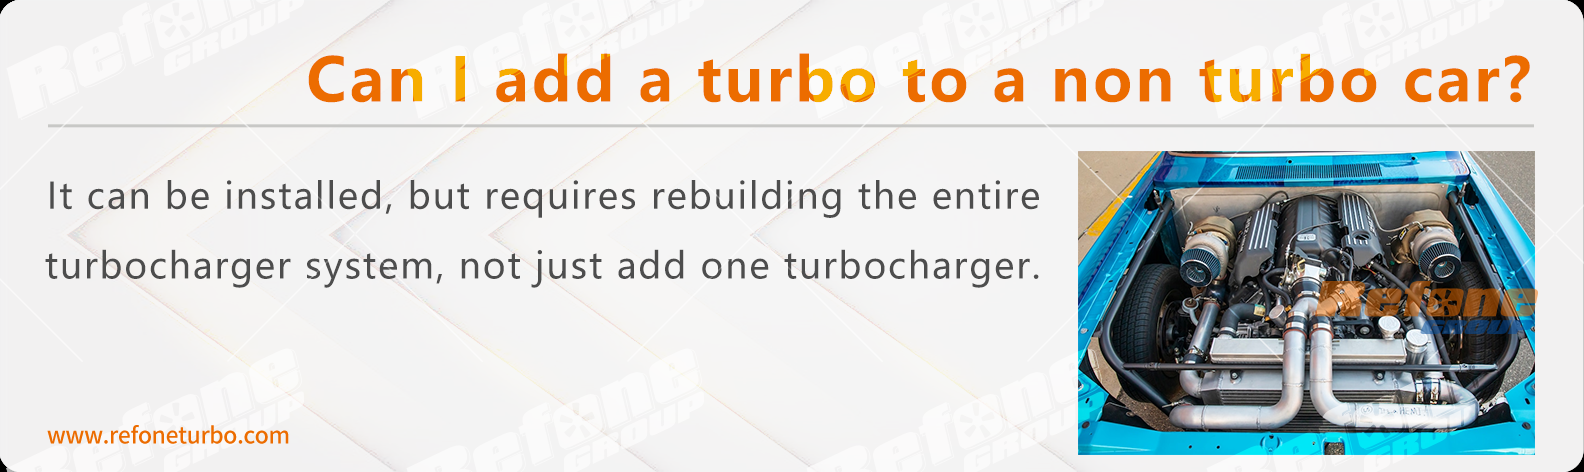 can I add a turbocharger to a non turbo car